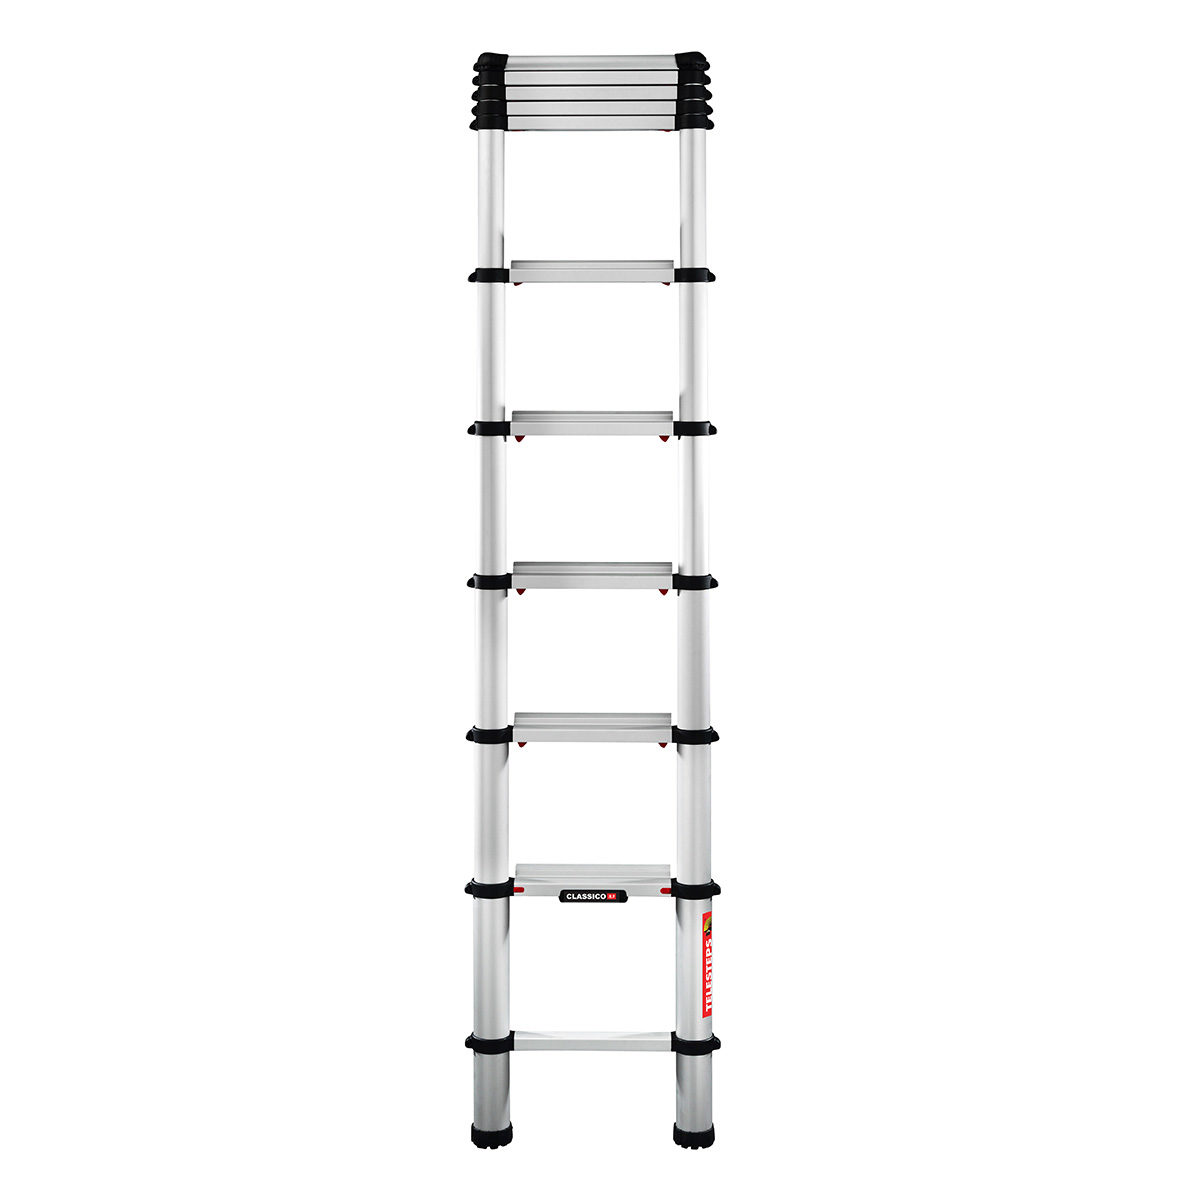 classico-line-33-front-intermediate-leaning-ladders-1200x1200